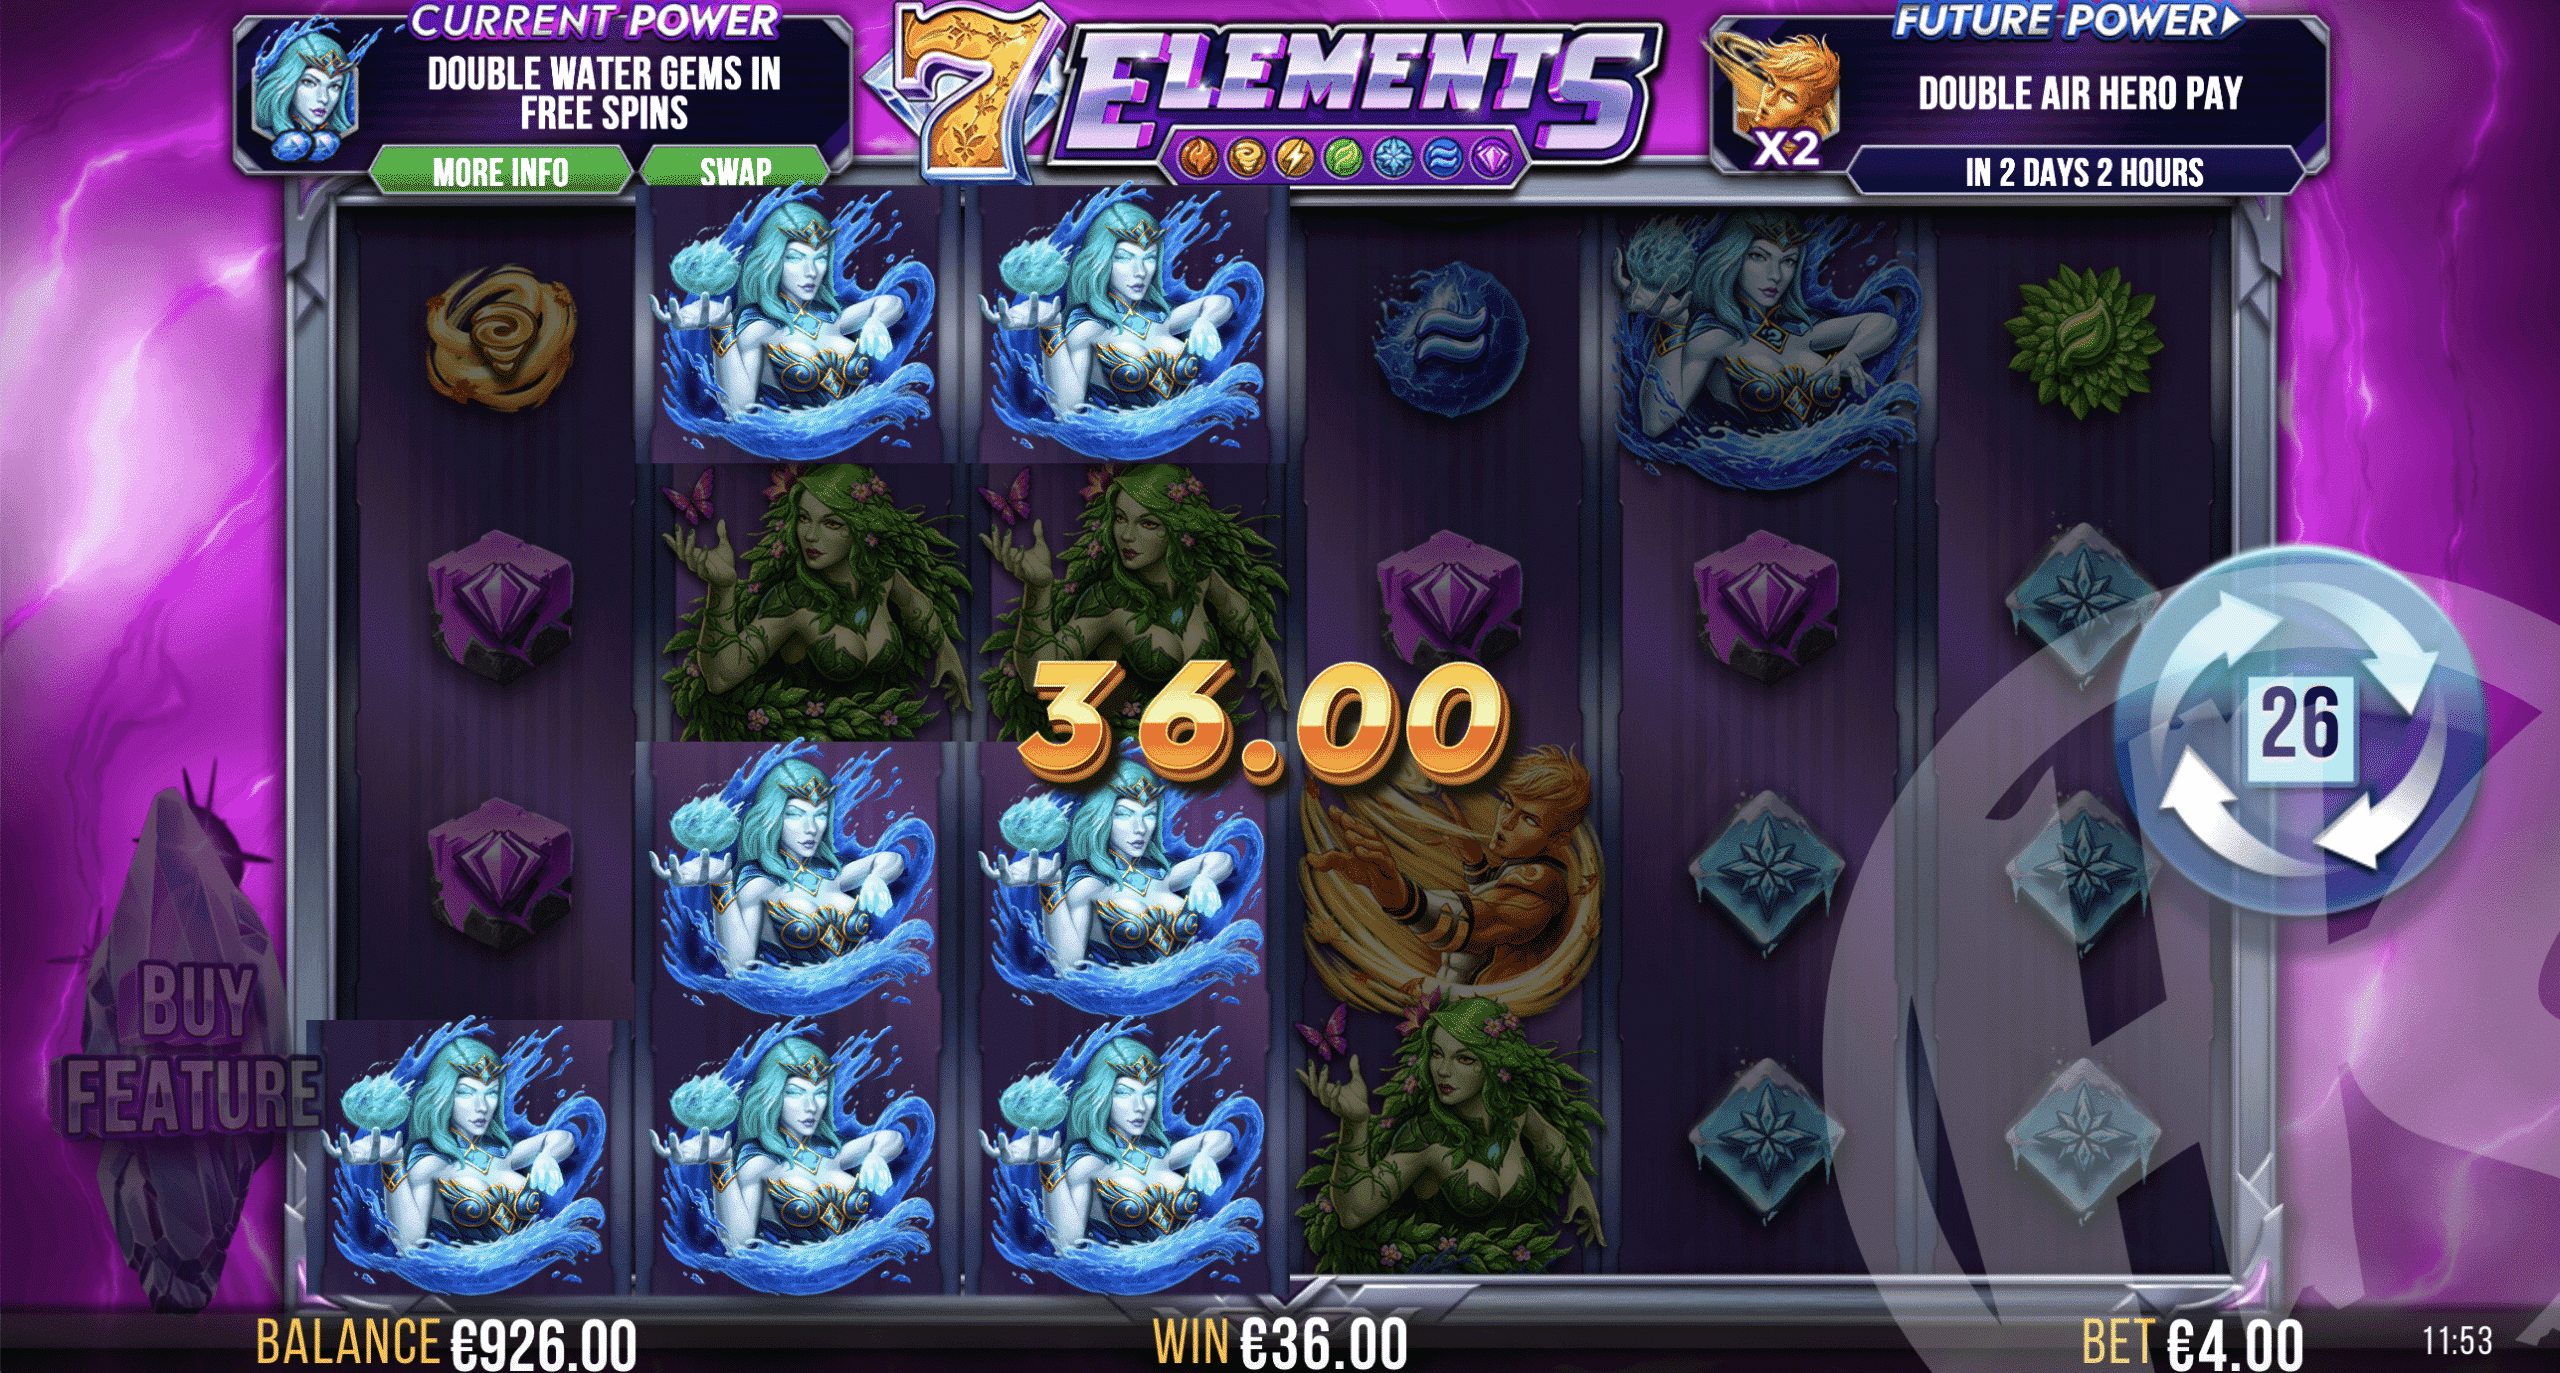 7 Elements Features 4,096 Ways to Win